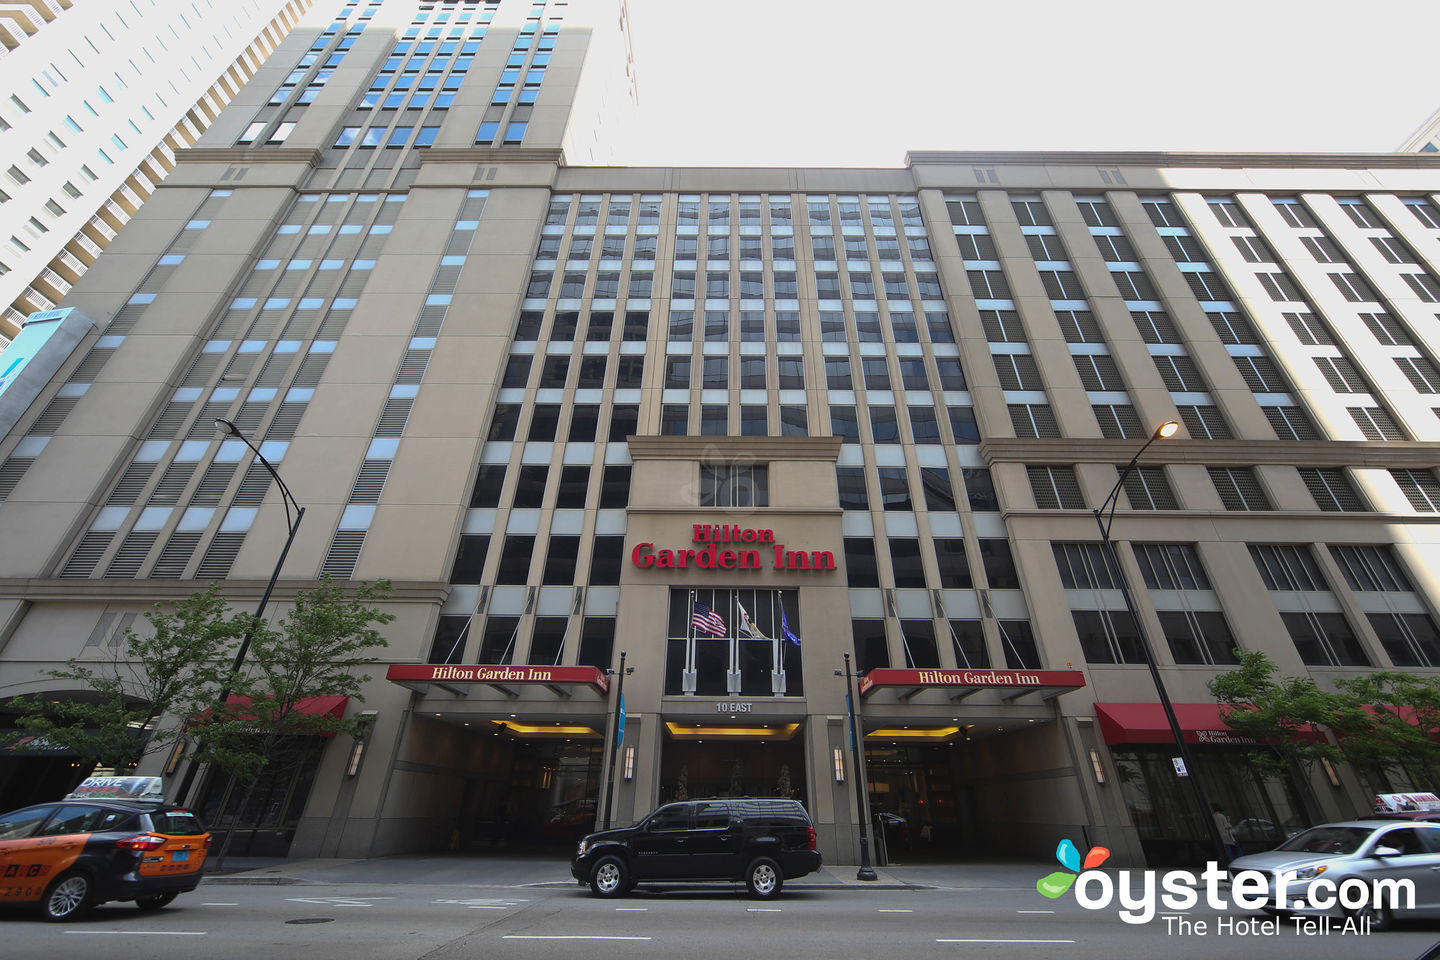 Hilton Garden Inn Chicago Downtownmagnificent Mile Review What To Really Expect If You Stay